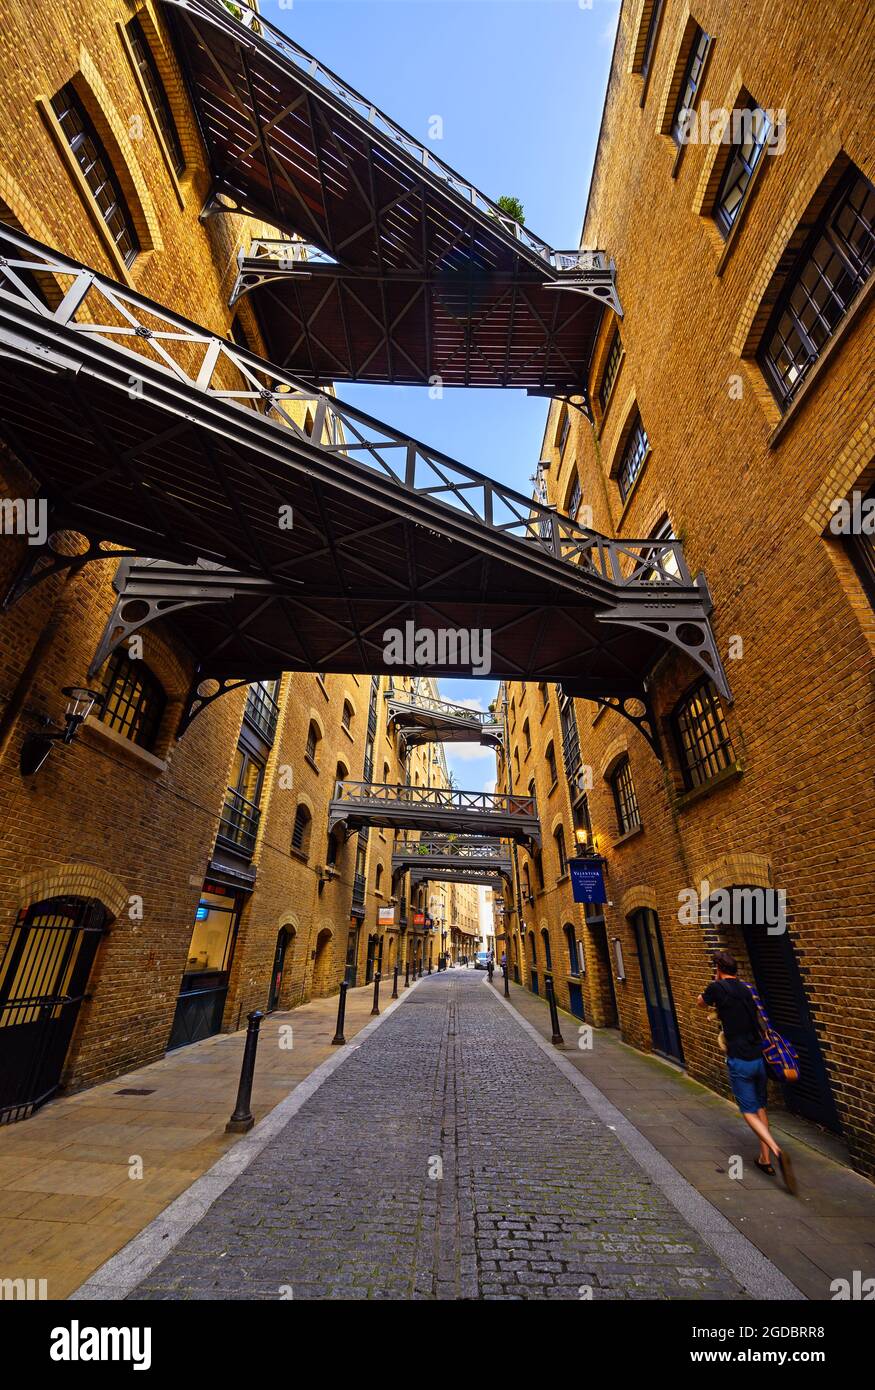 Historic Shad Thames in London near Tower Bridge. This old cobbled street in Bermondsey is known for its overhead walkways. Stock Photo